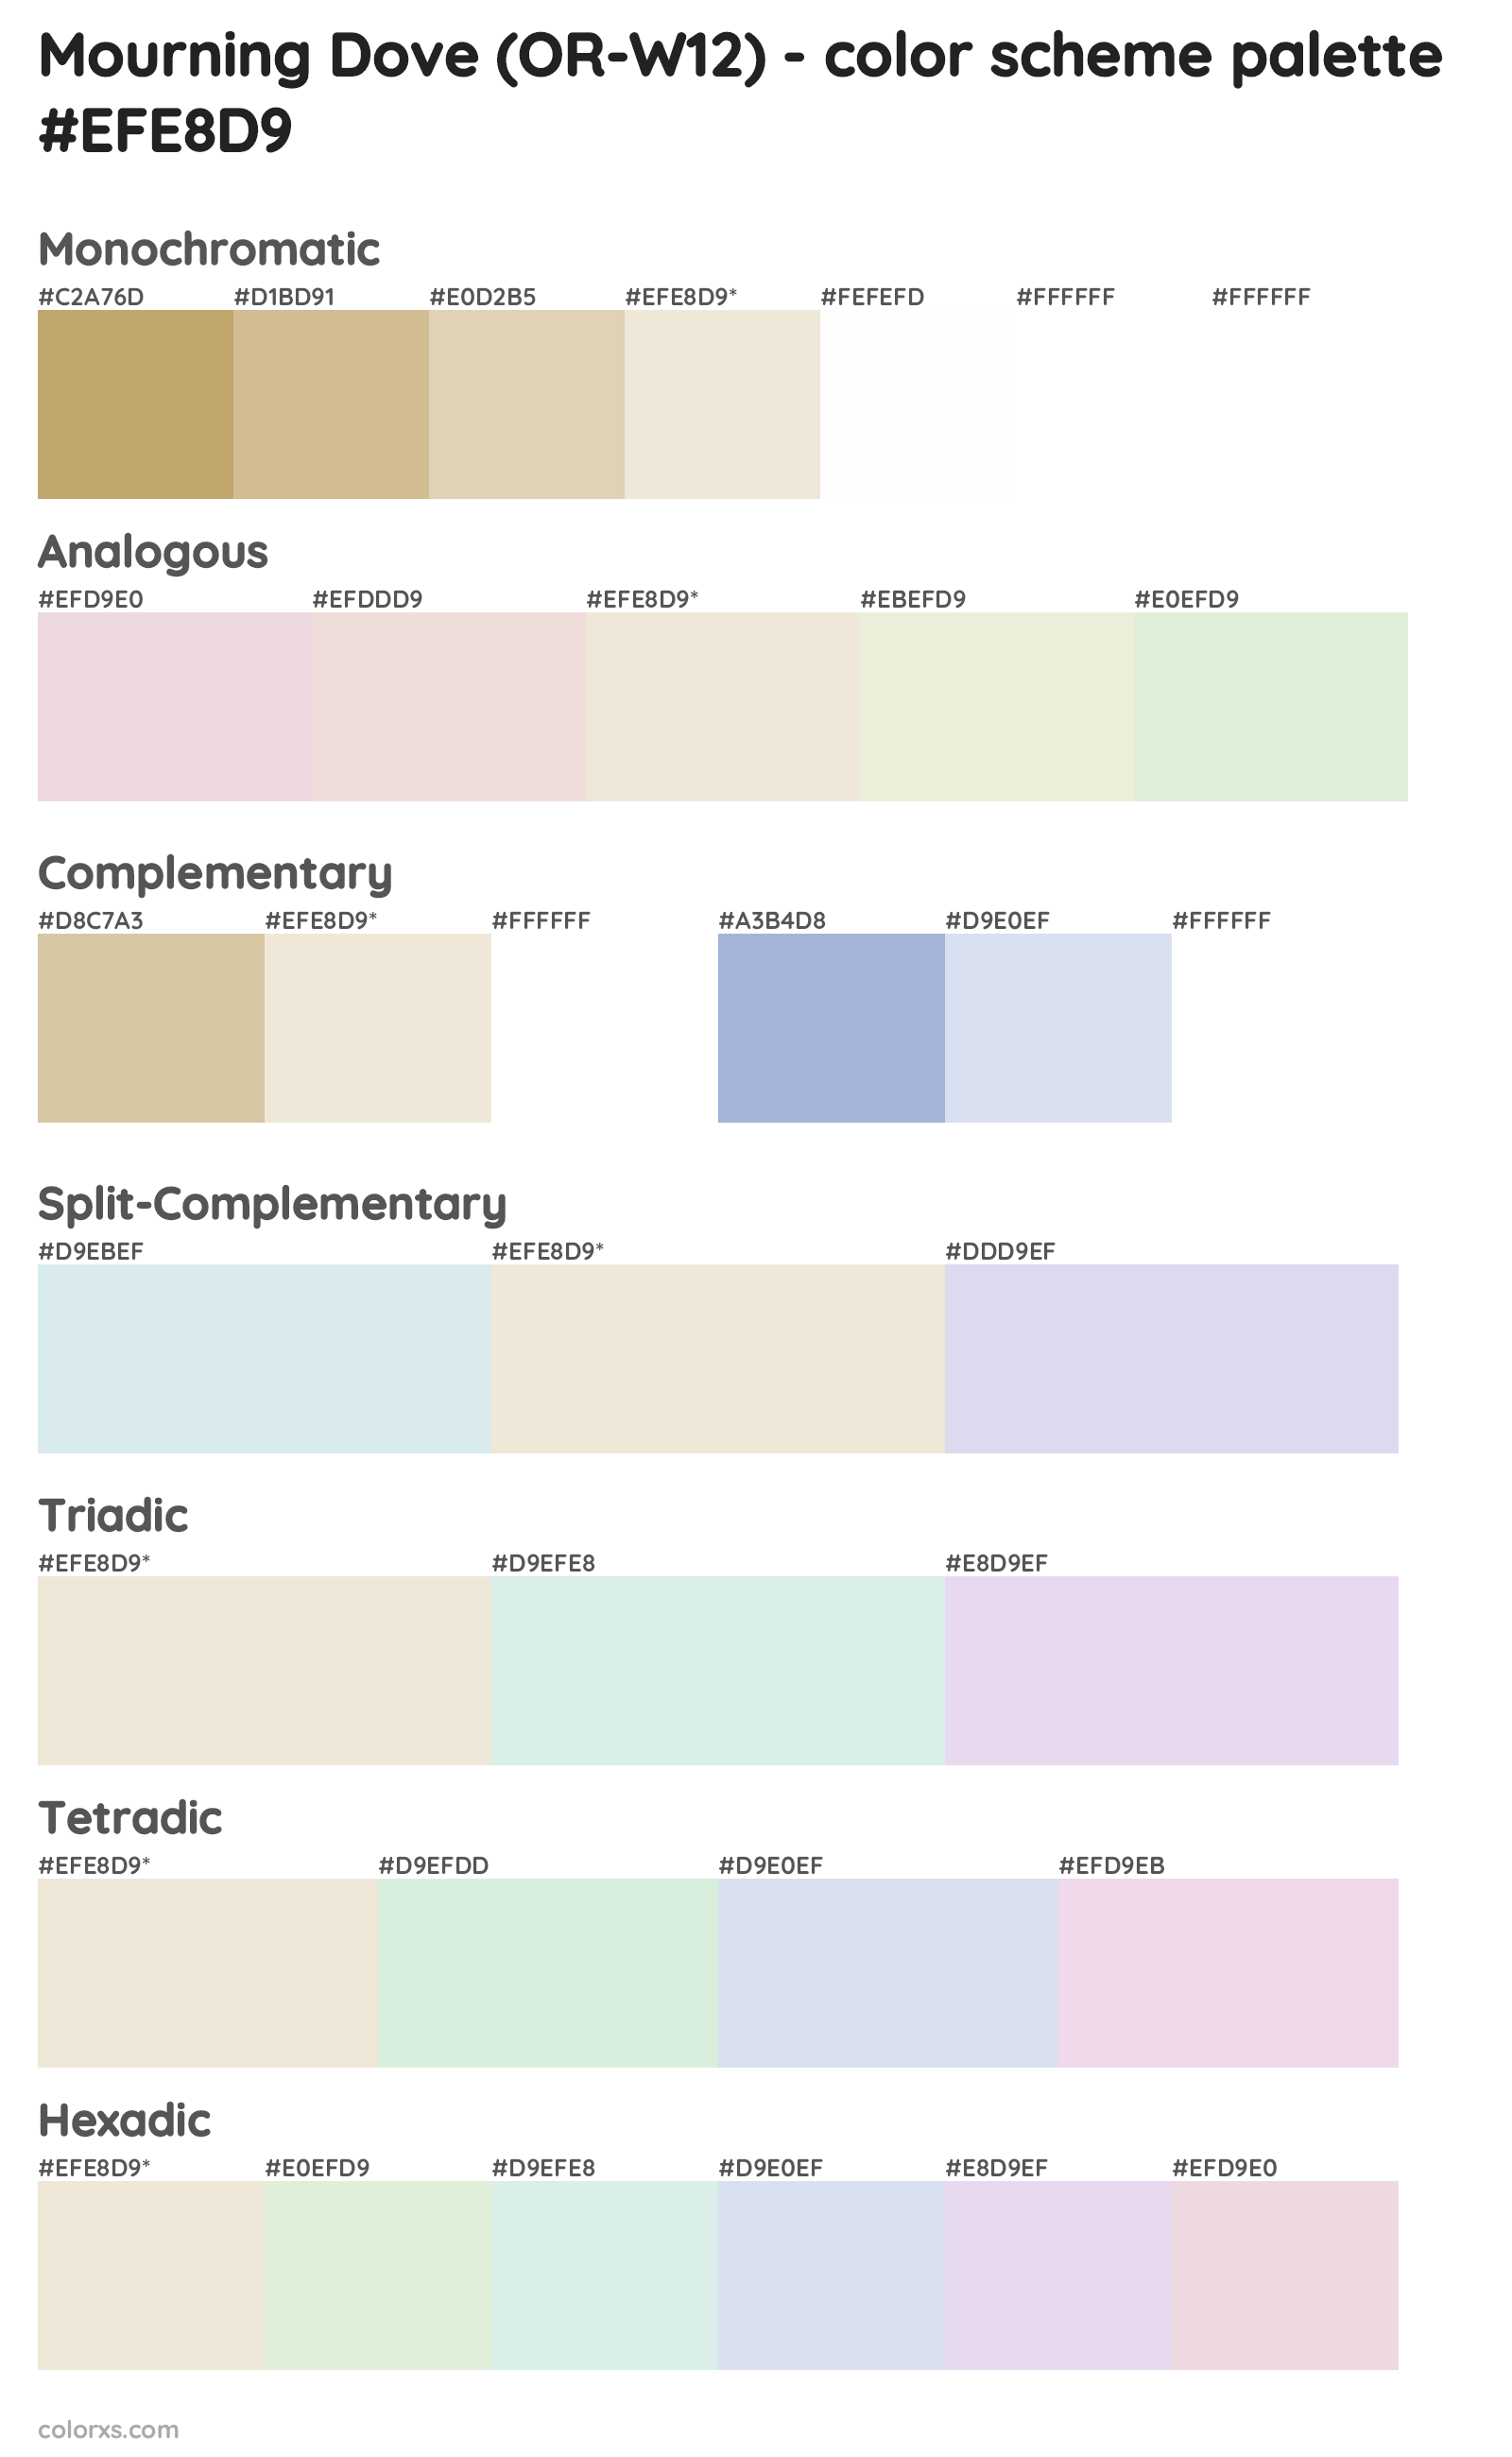 Mourning Dove (OR-W12) Color Scheme Palettes